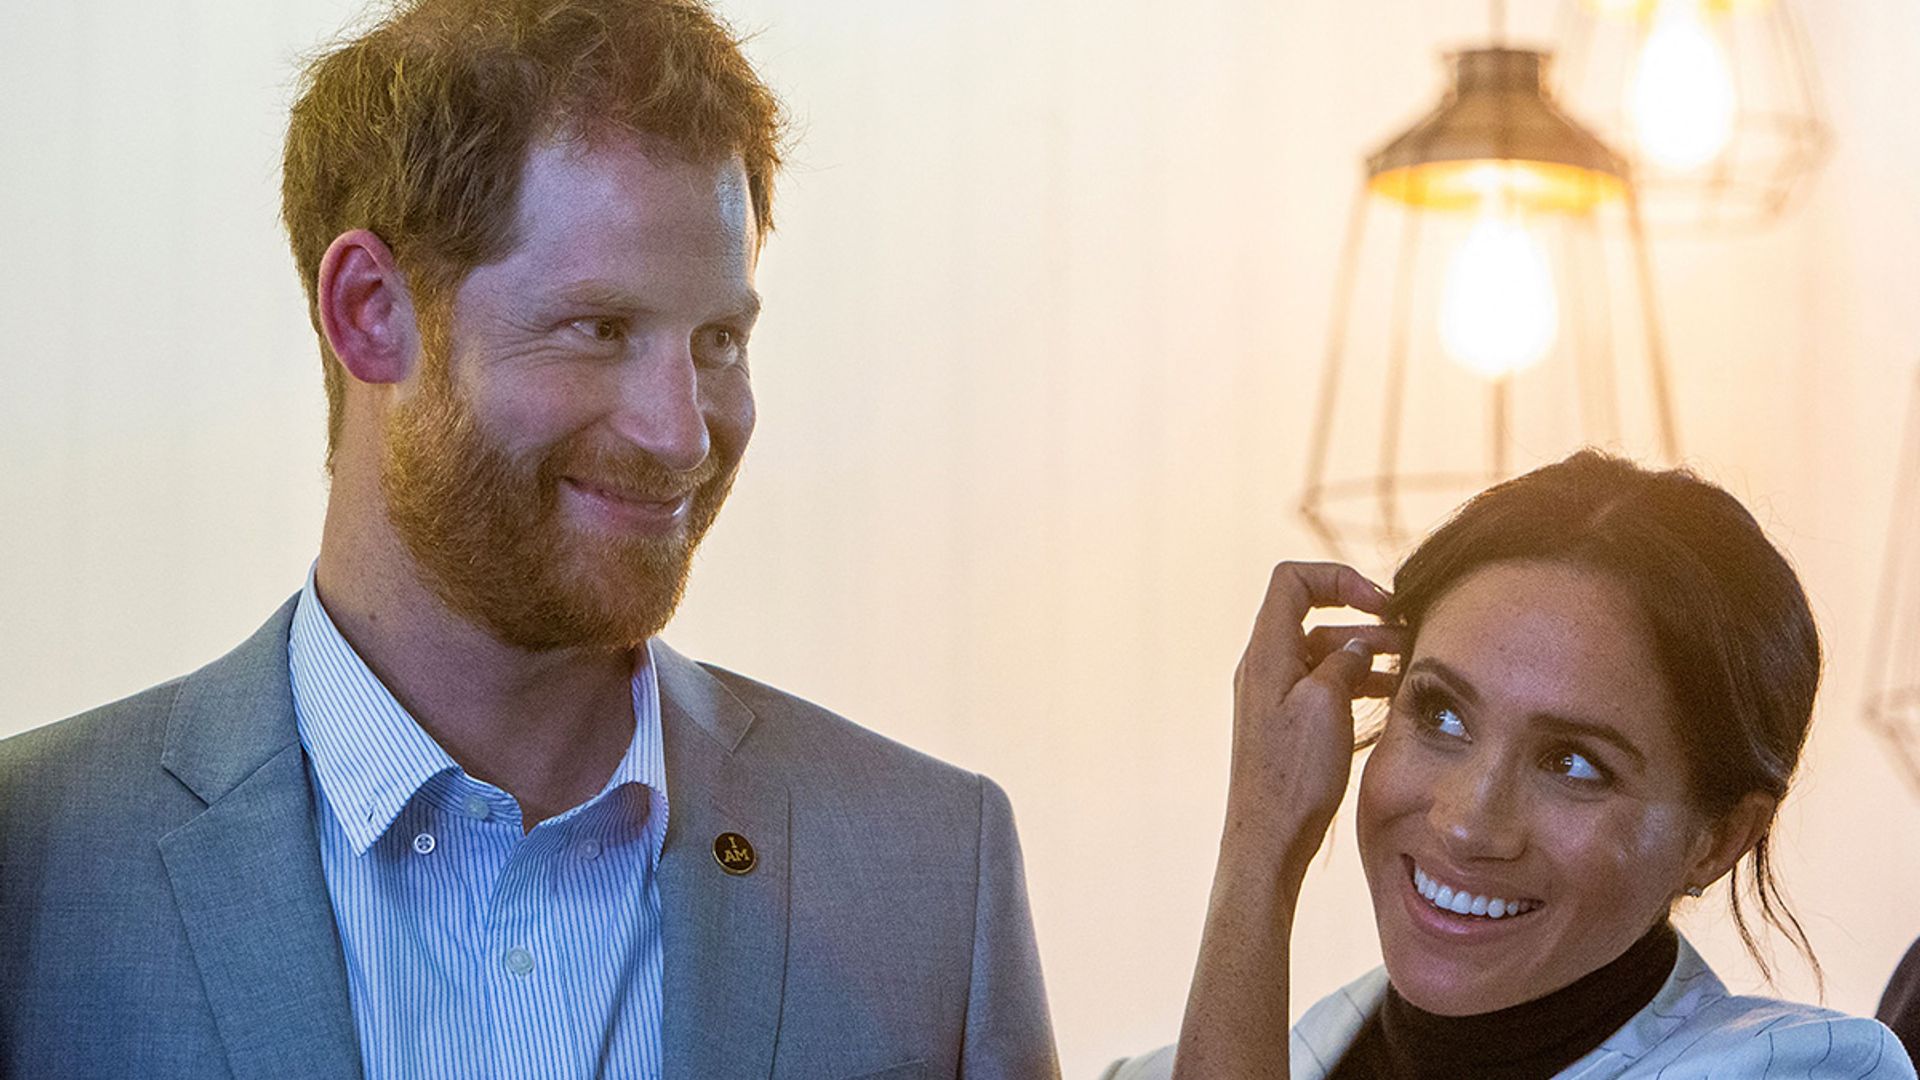 Prince Harry & Meghan Markle's secret games room is a world of fun